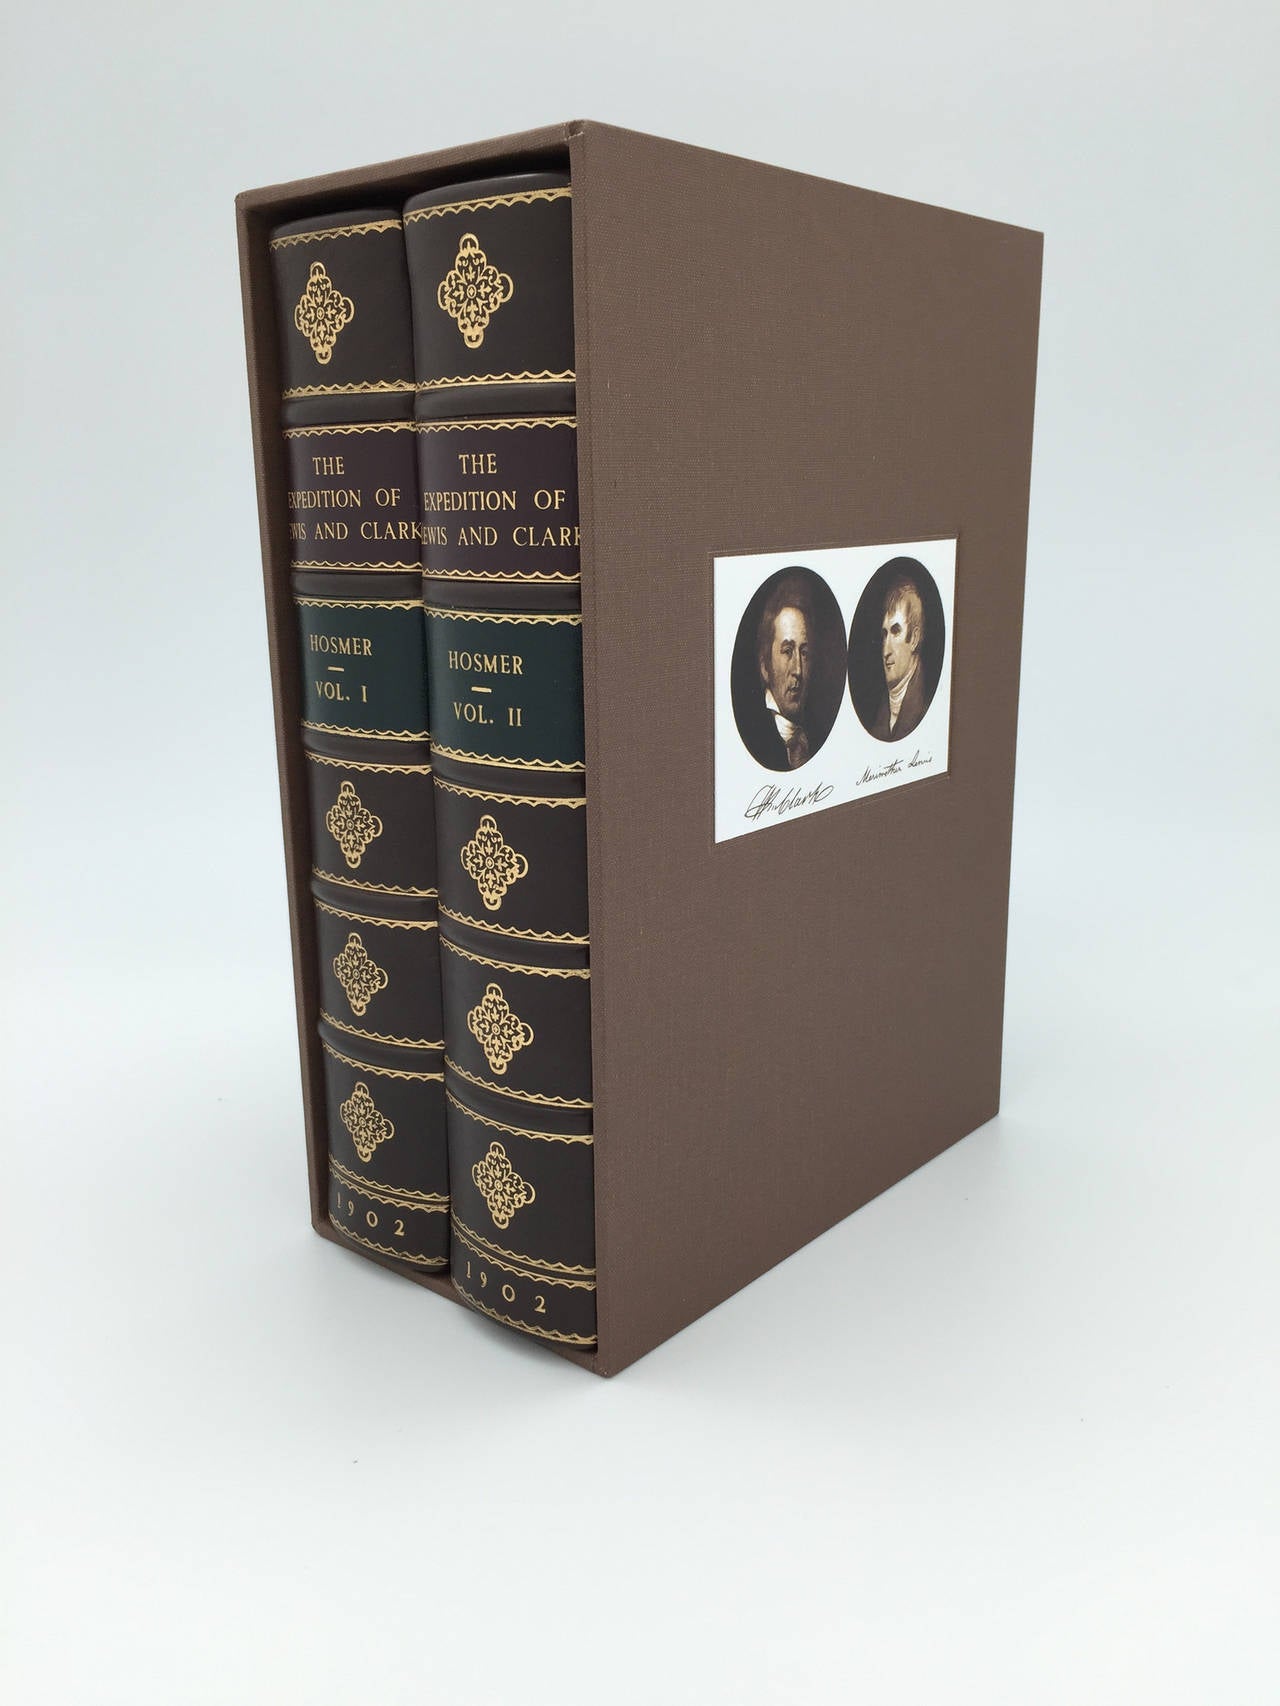 The published journals of Meriwether Lewis and William Lewis of their momentous expedition of discovery into the newly purchased Louisiana Territory in 1804-1806.

This two volume set is the 1902 reprinted edition of the 1814 originals - includes